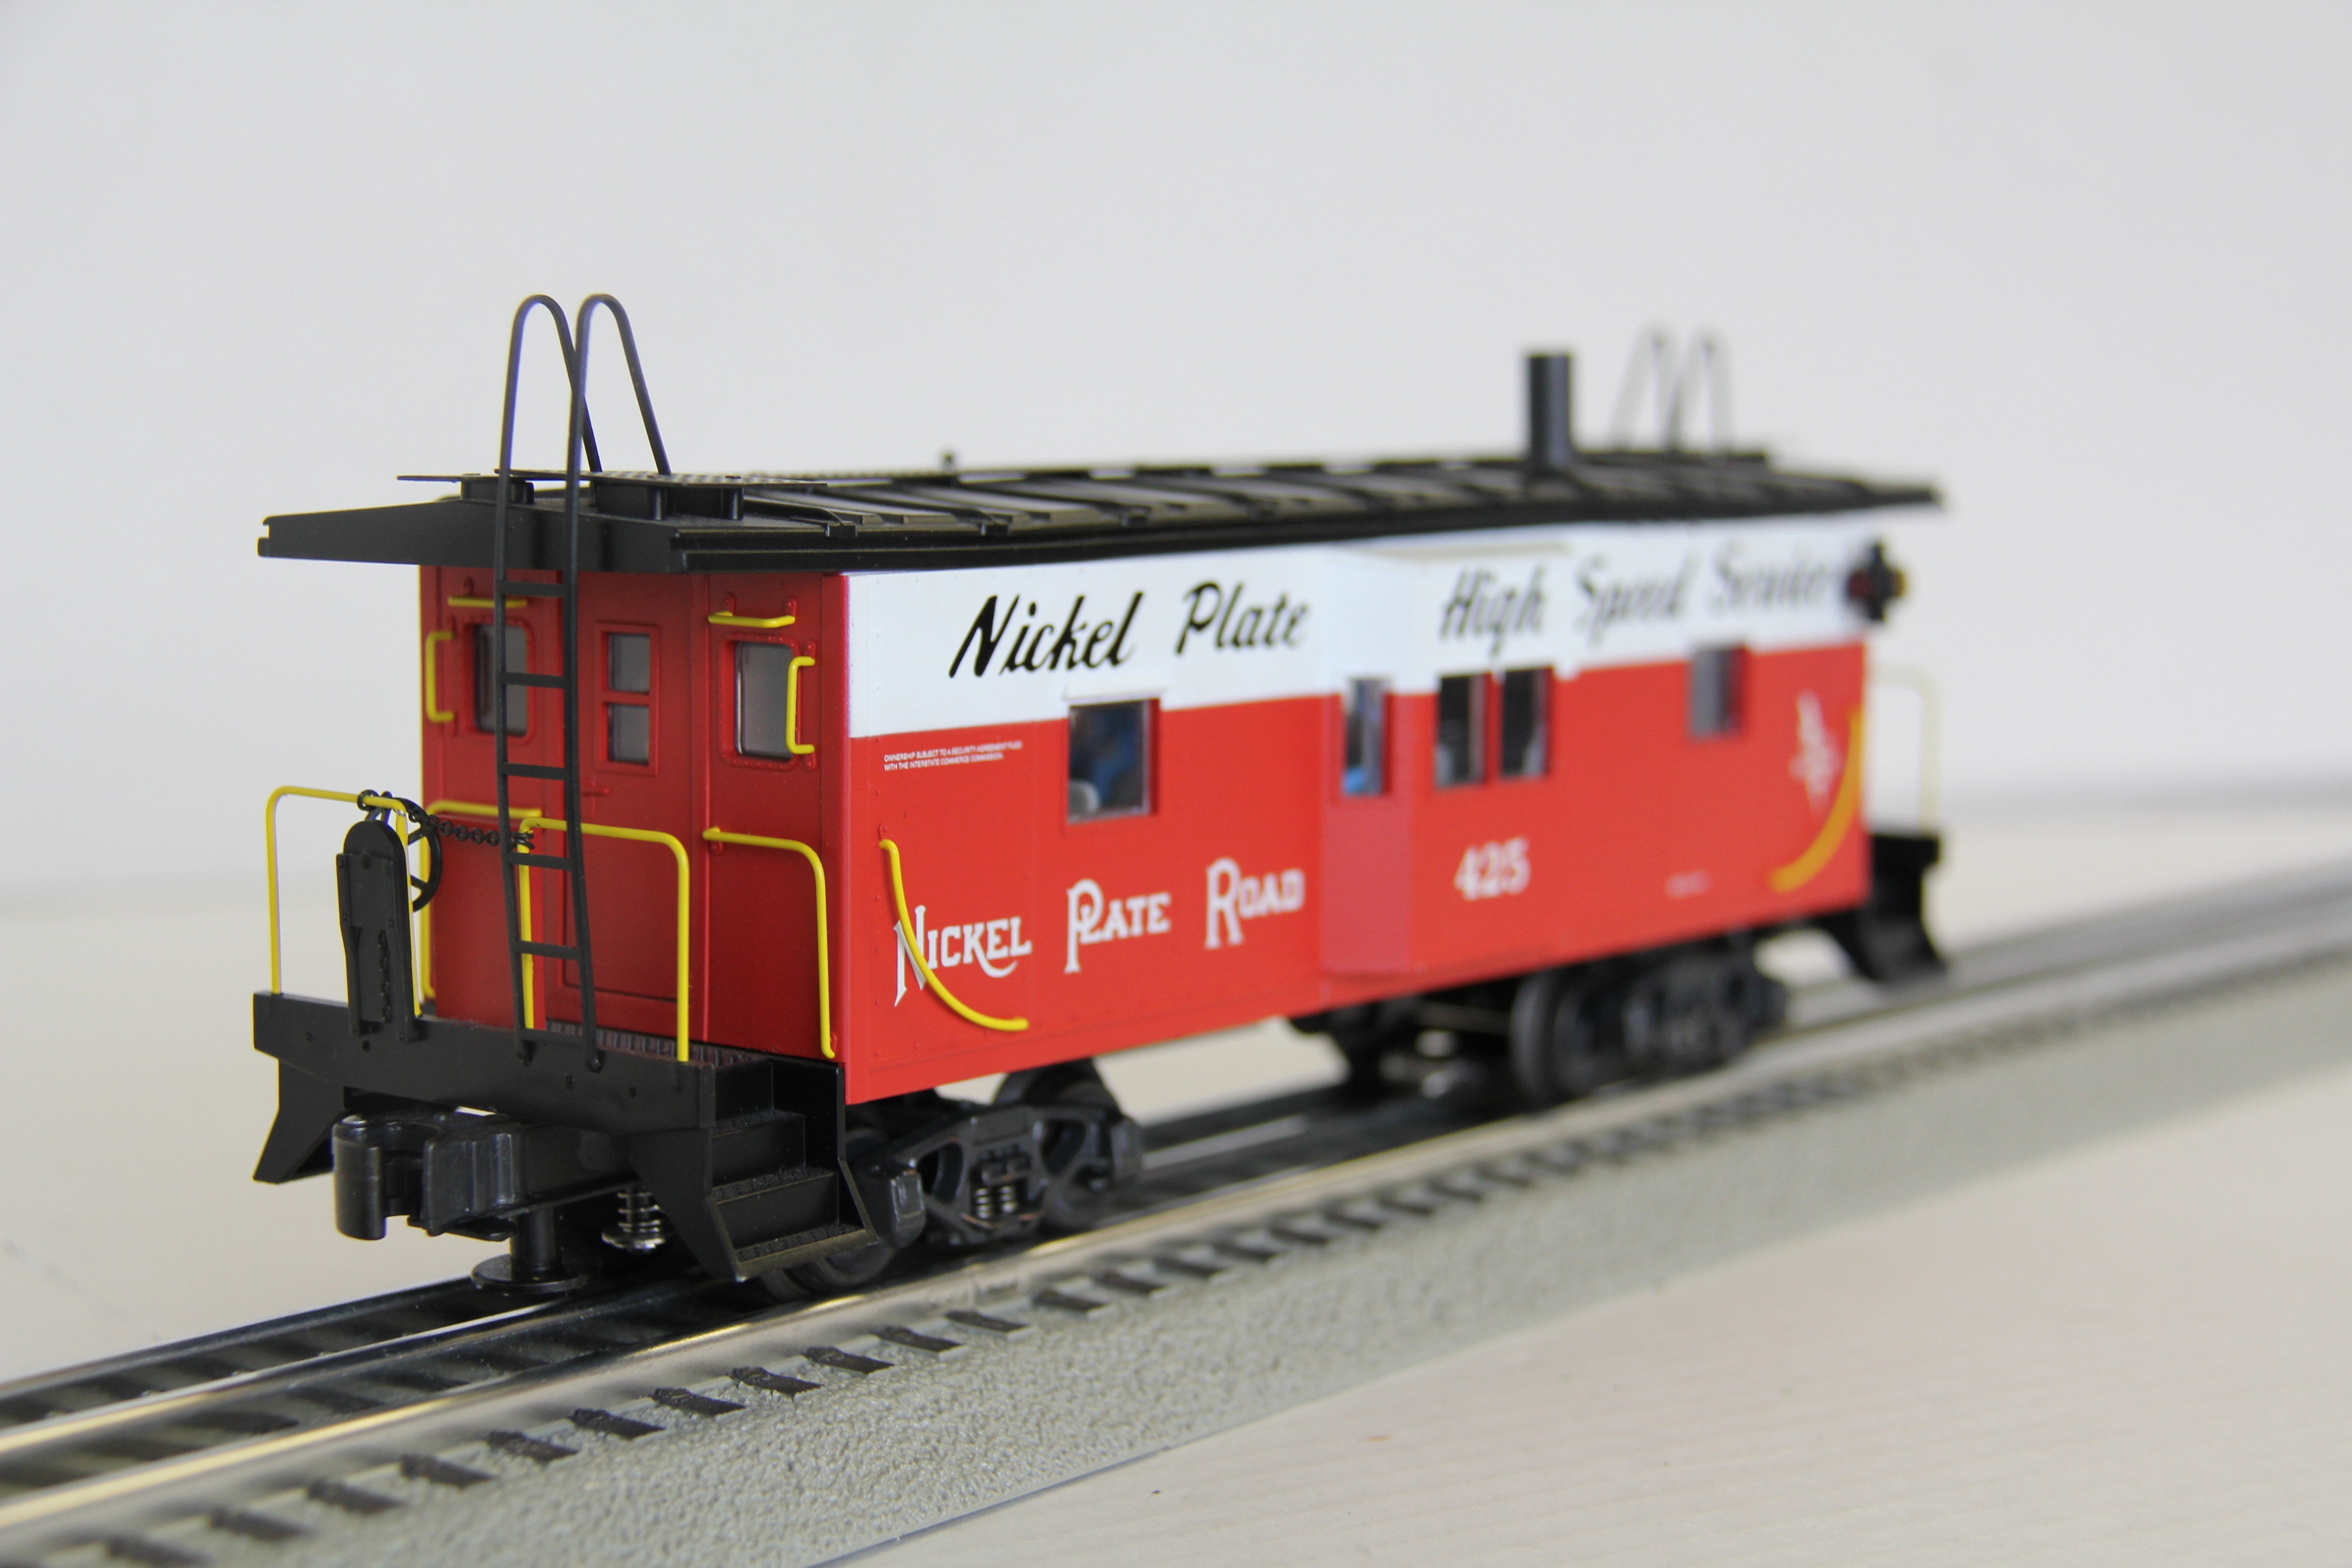 K Line K612-1771 Nickle Plate Road Bay Window Caboose-Second hand-M4082